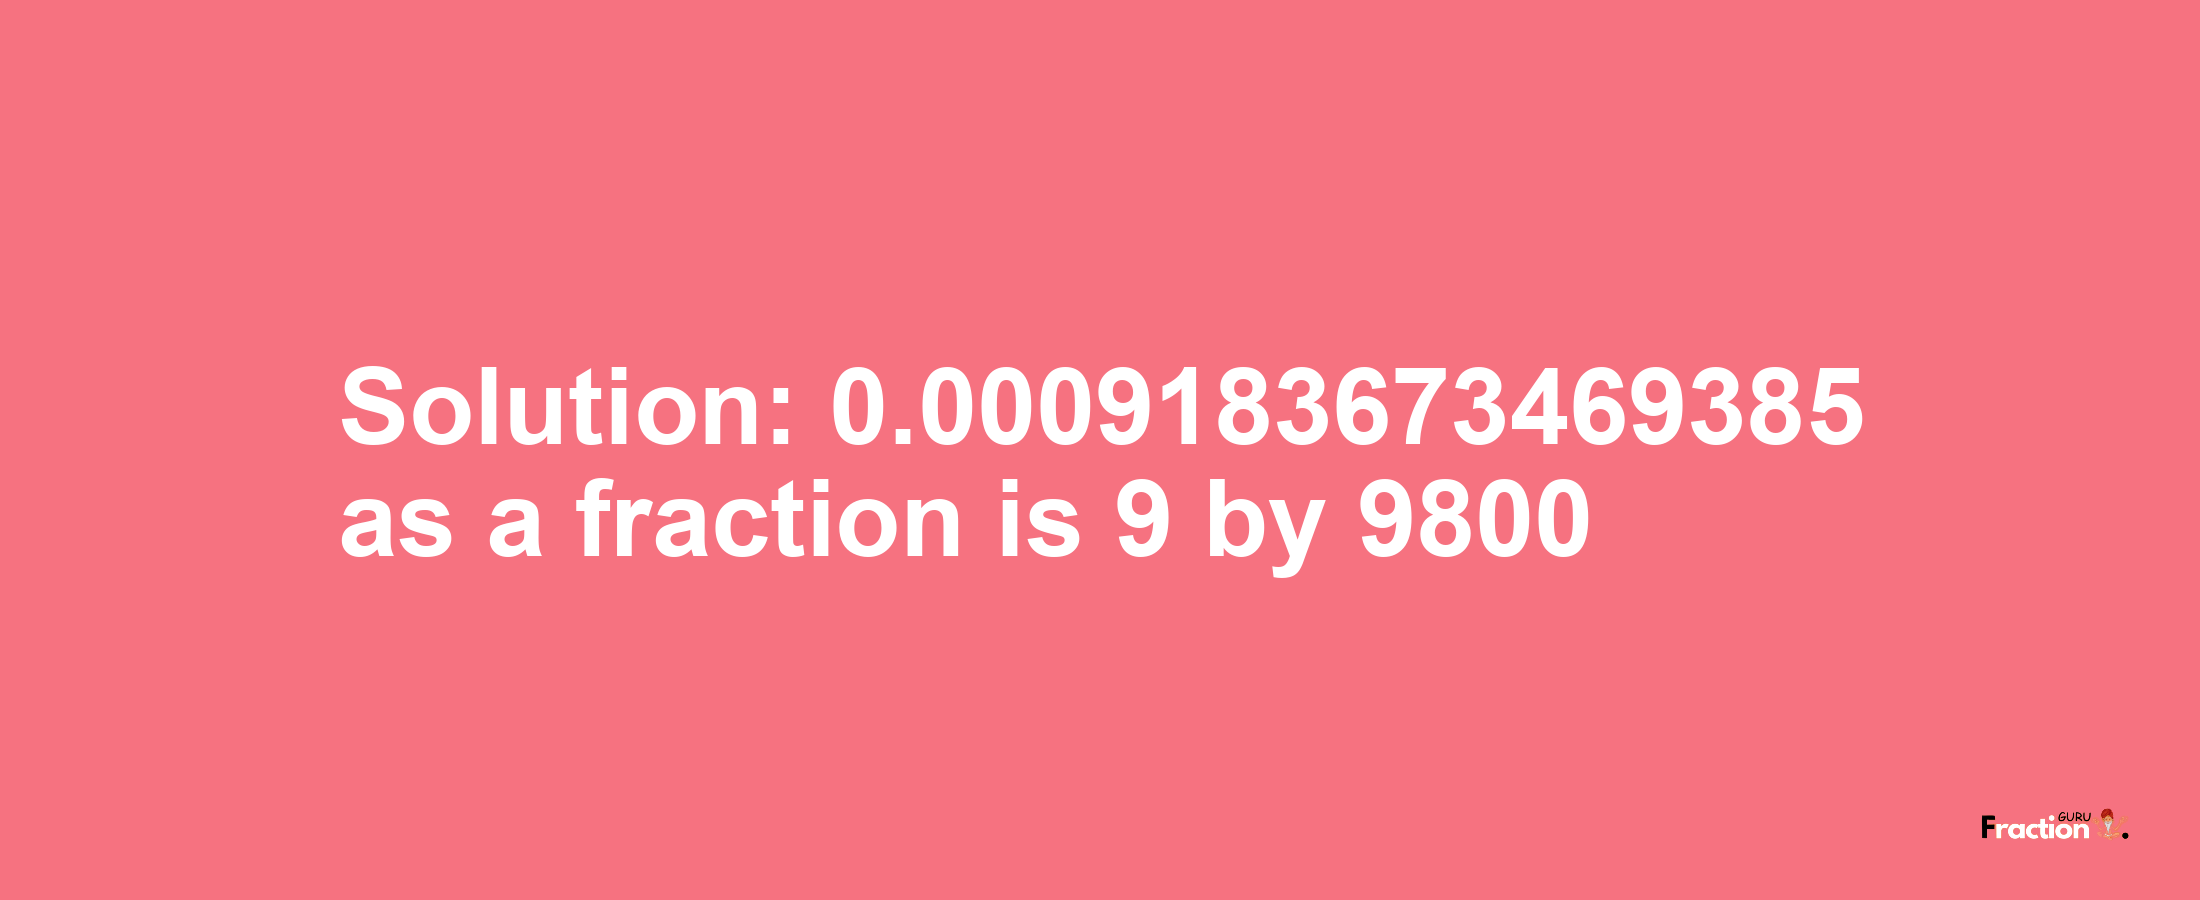 Solution:0.0009183673469385 as a fraction is 9/9800